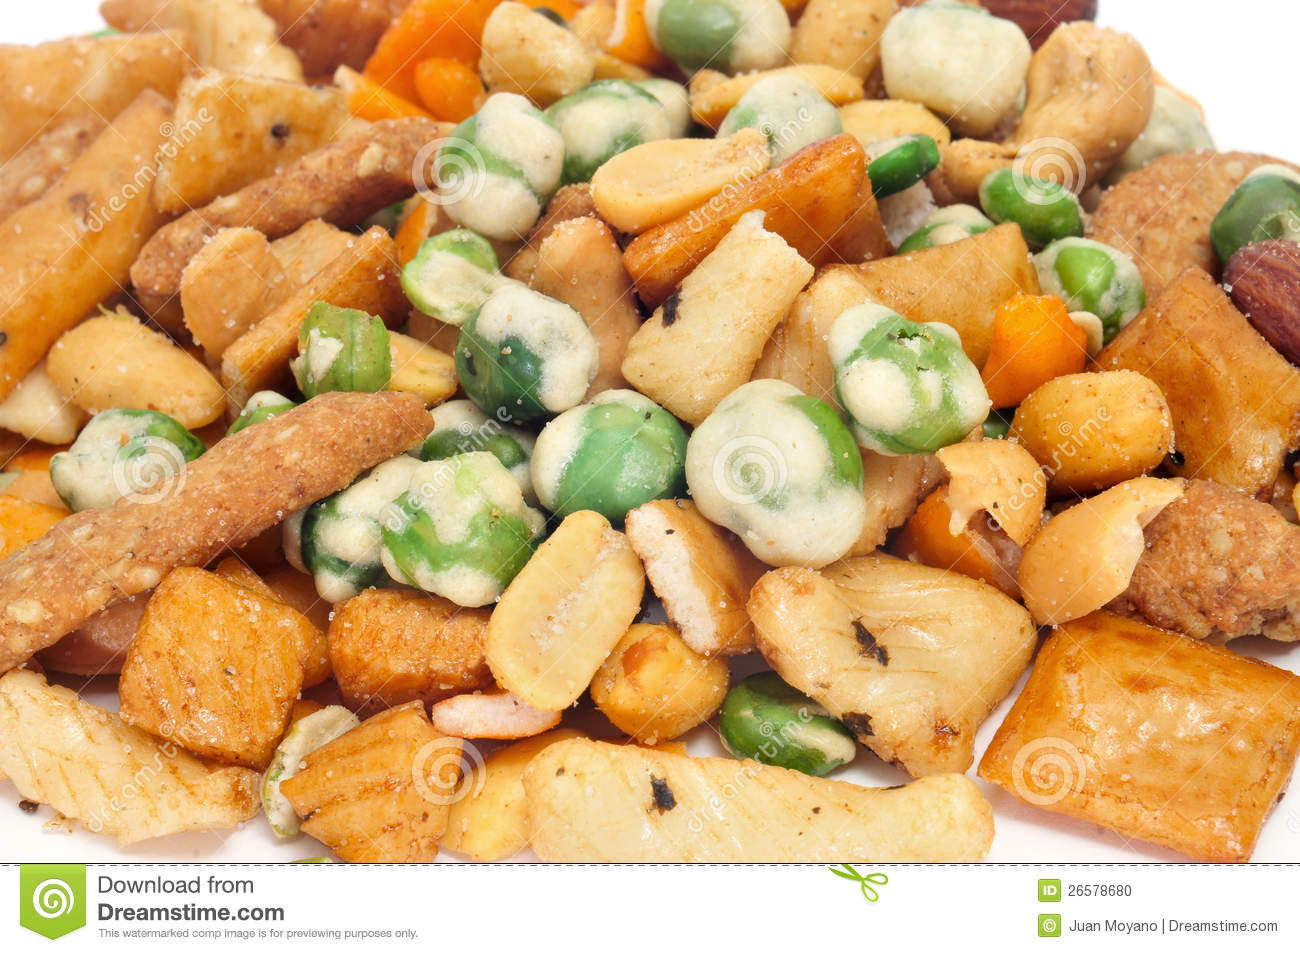 Mixed Nuts And Salty Crackers Stock Photo   Image  26578680